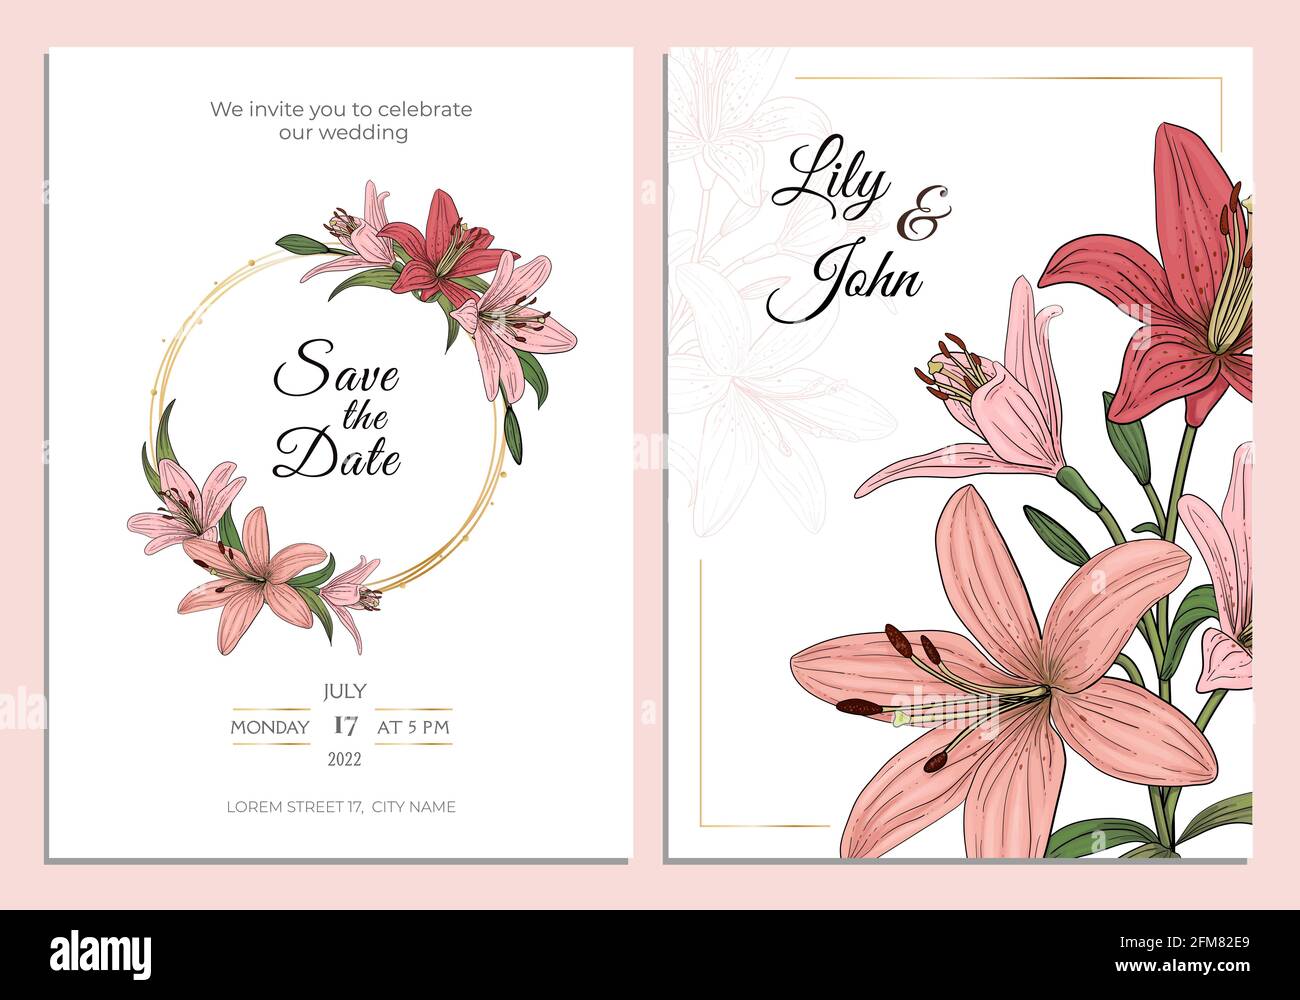 Pink lily wedding invitation card template design, lilies flowers, and leaves with gold frame vintage linear art sketch style vector illustration. Flow Stock Vector